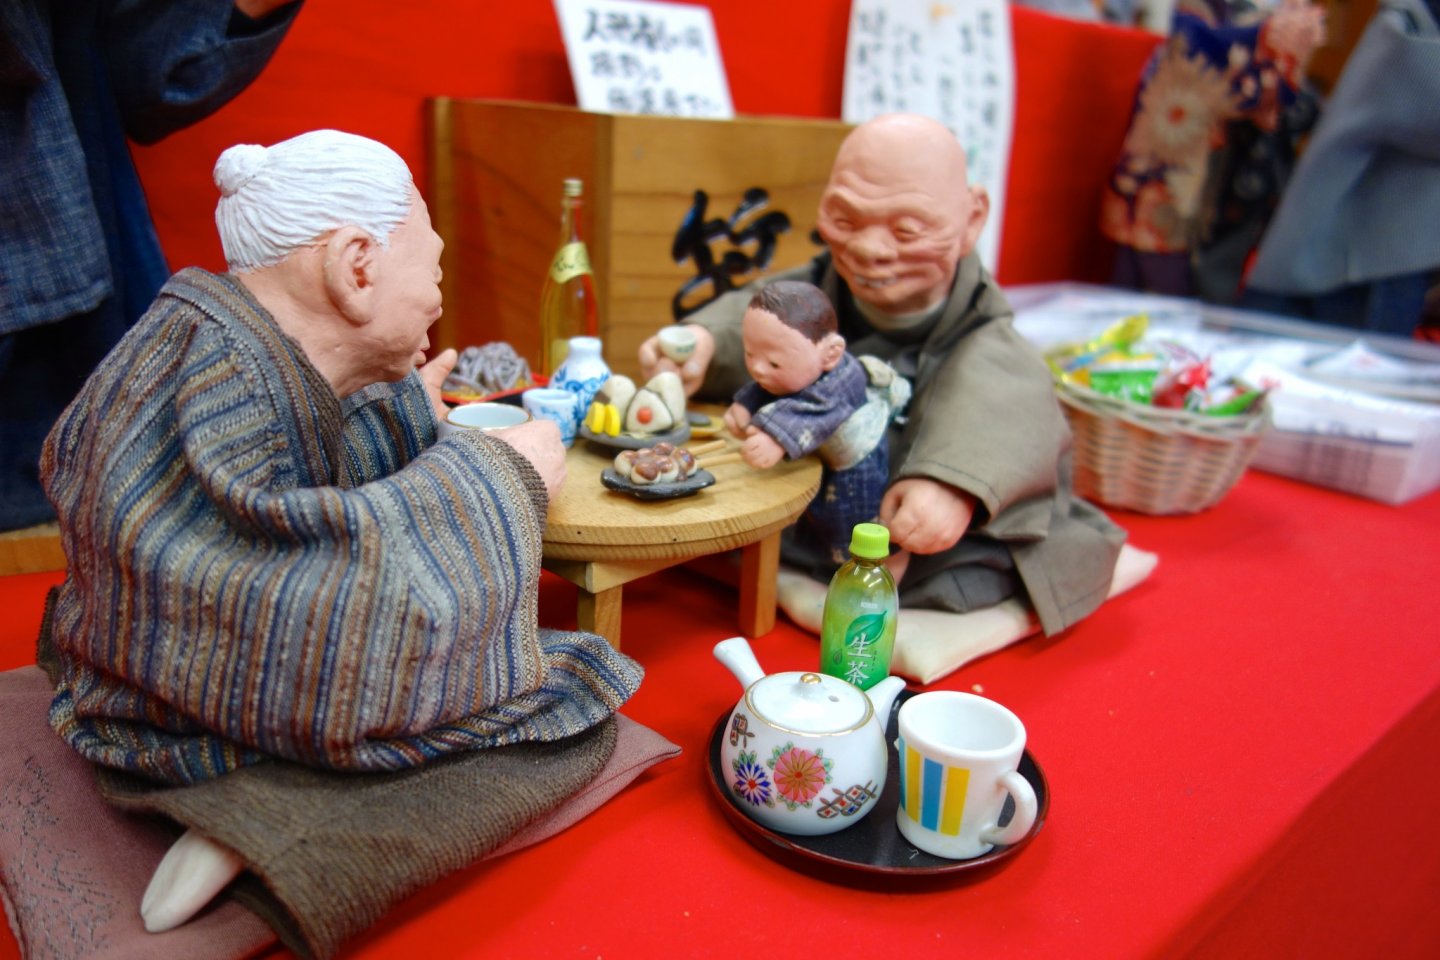 The puppets depict an intimate home scene between an elderly couple and their grandchild, presumably